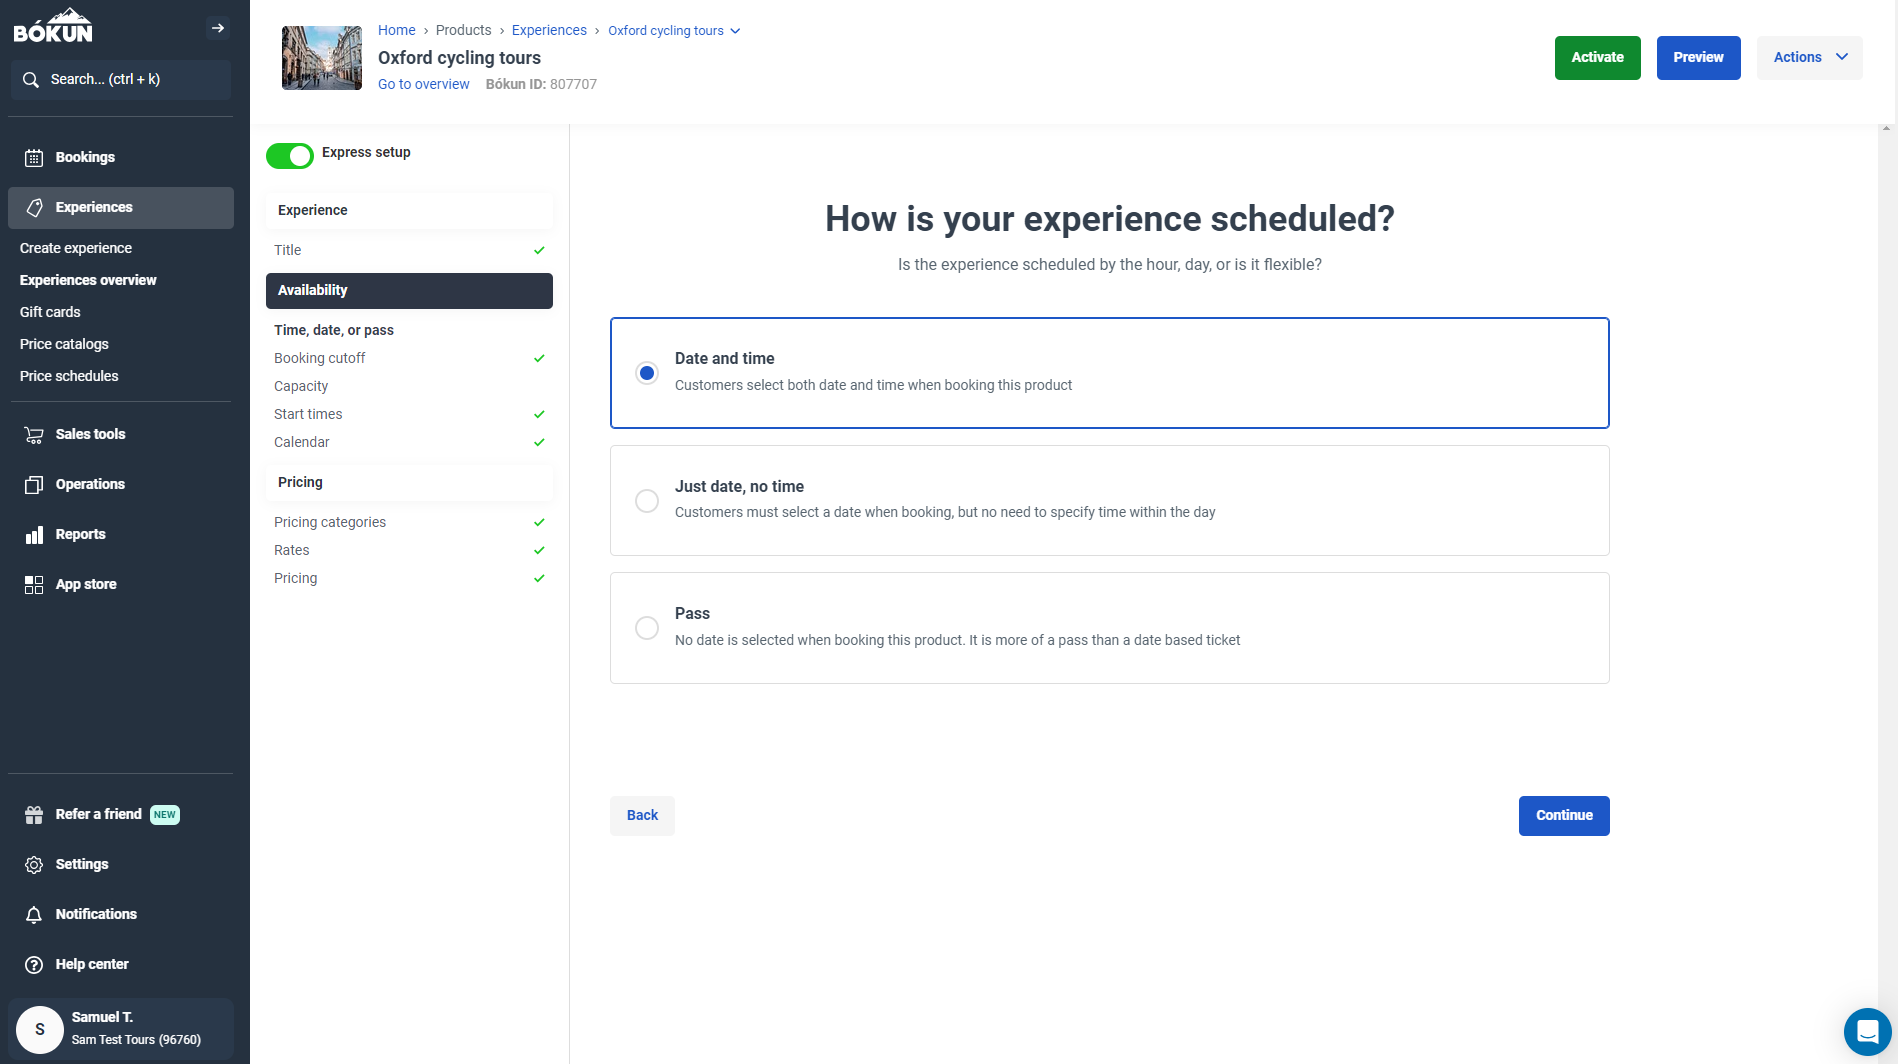 How is your experience scheduled? (Date and Time, Just date, Pass)